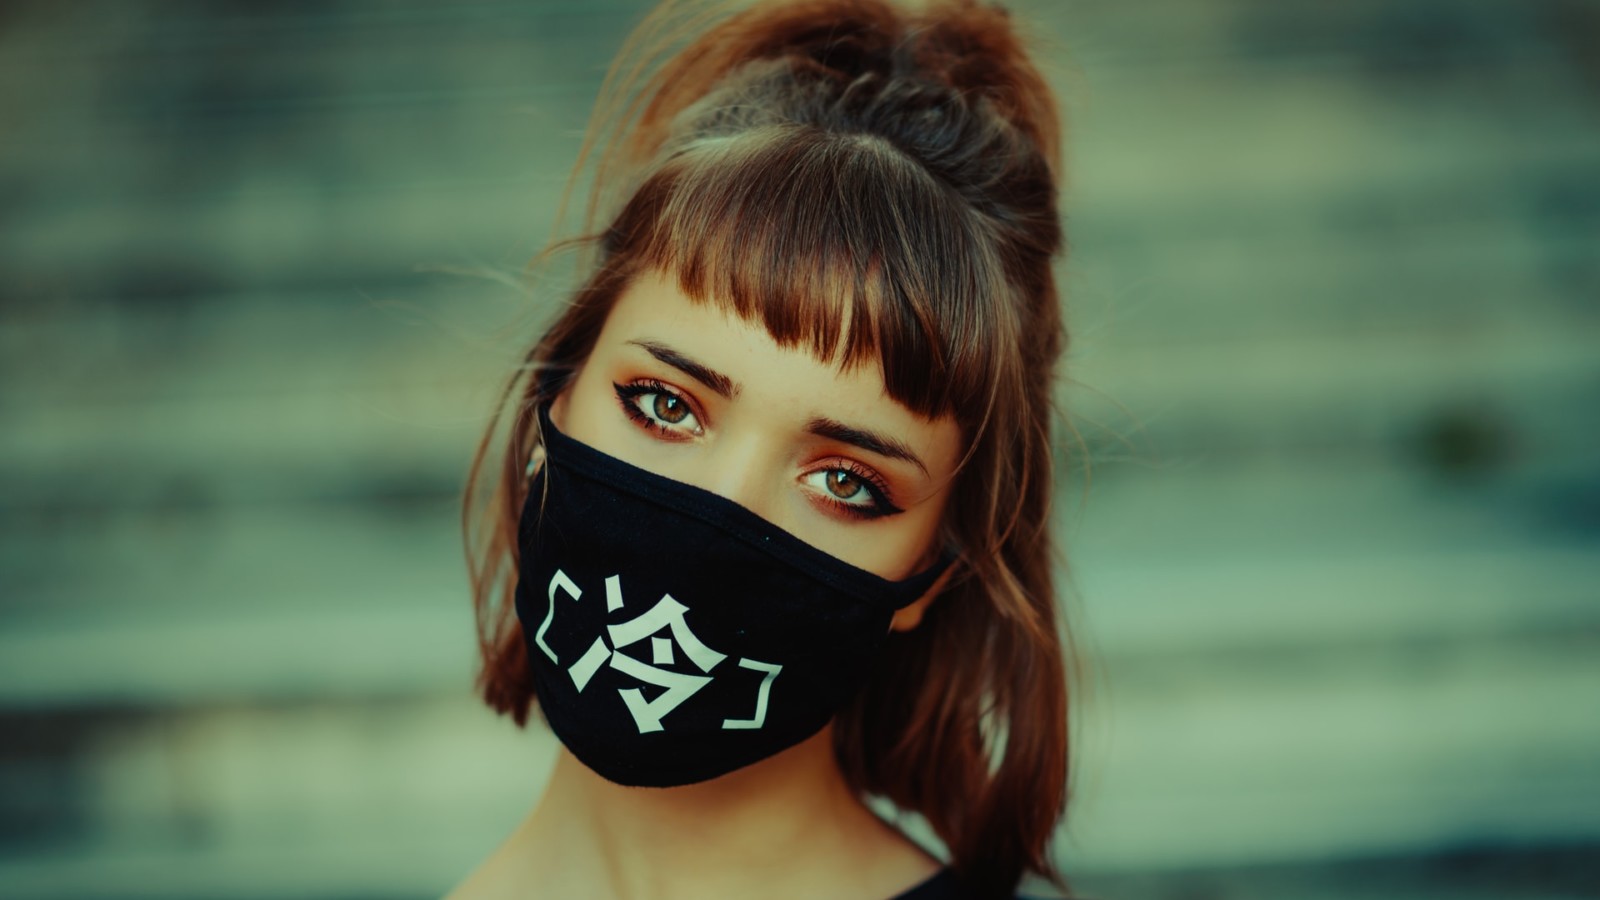 girl wearing a mask in the Covid-19 pandemic